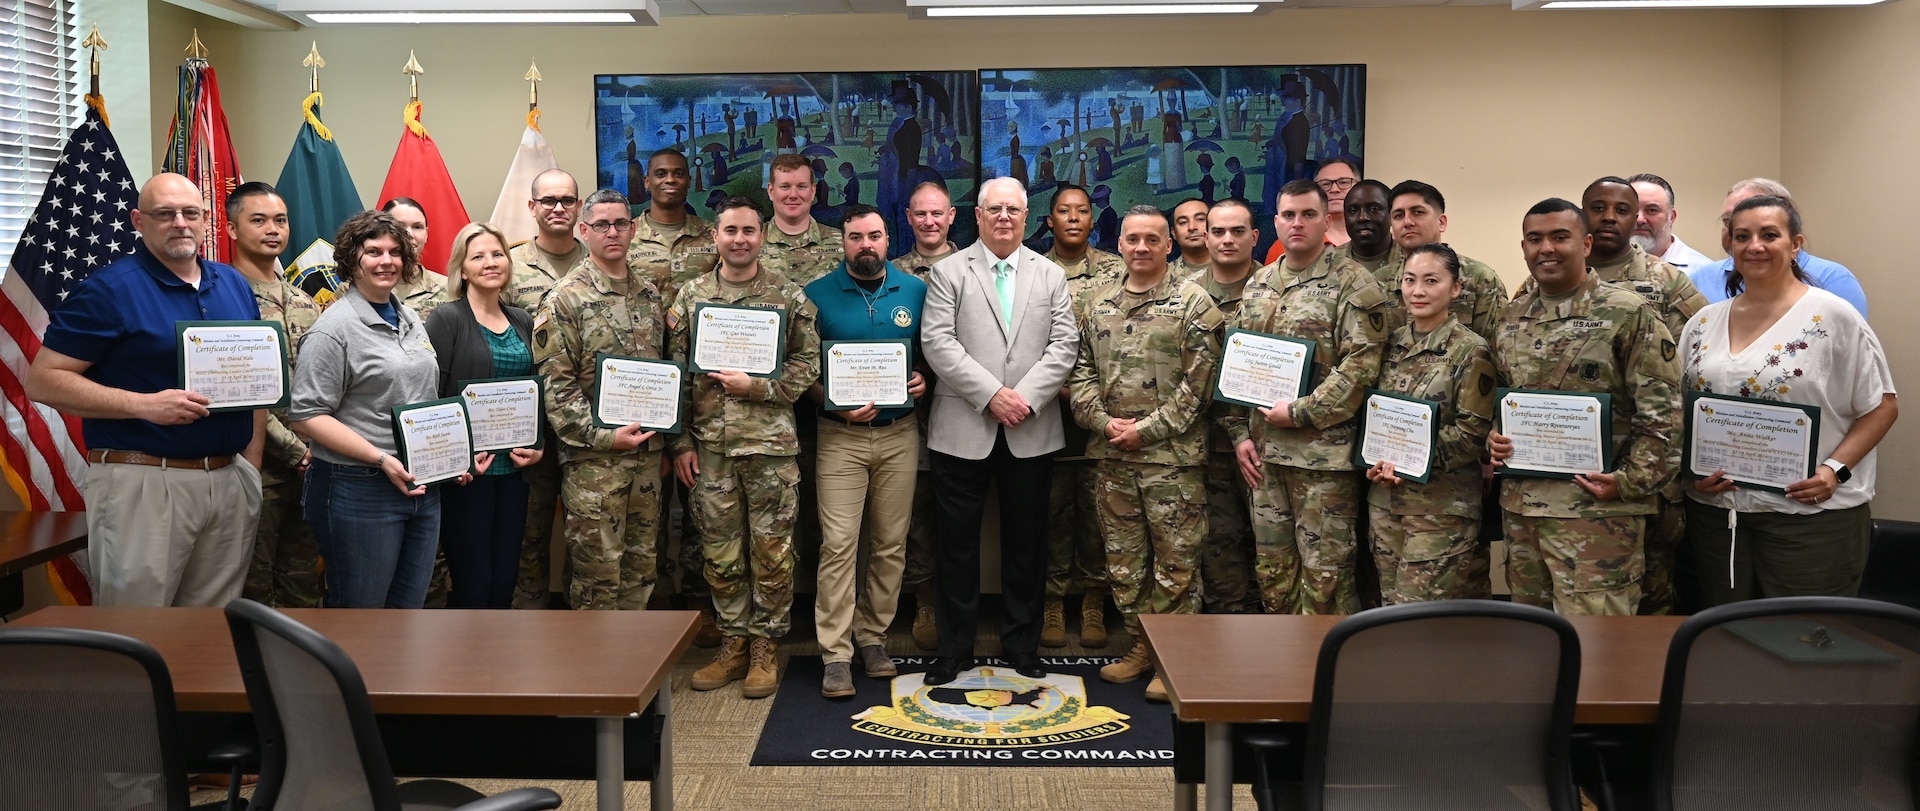 MICC graduates contract leaders, master gunner courses